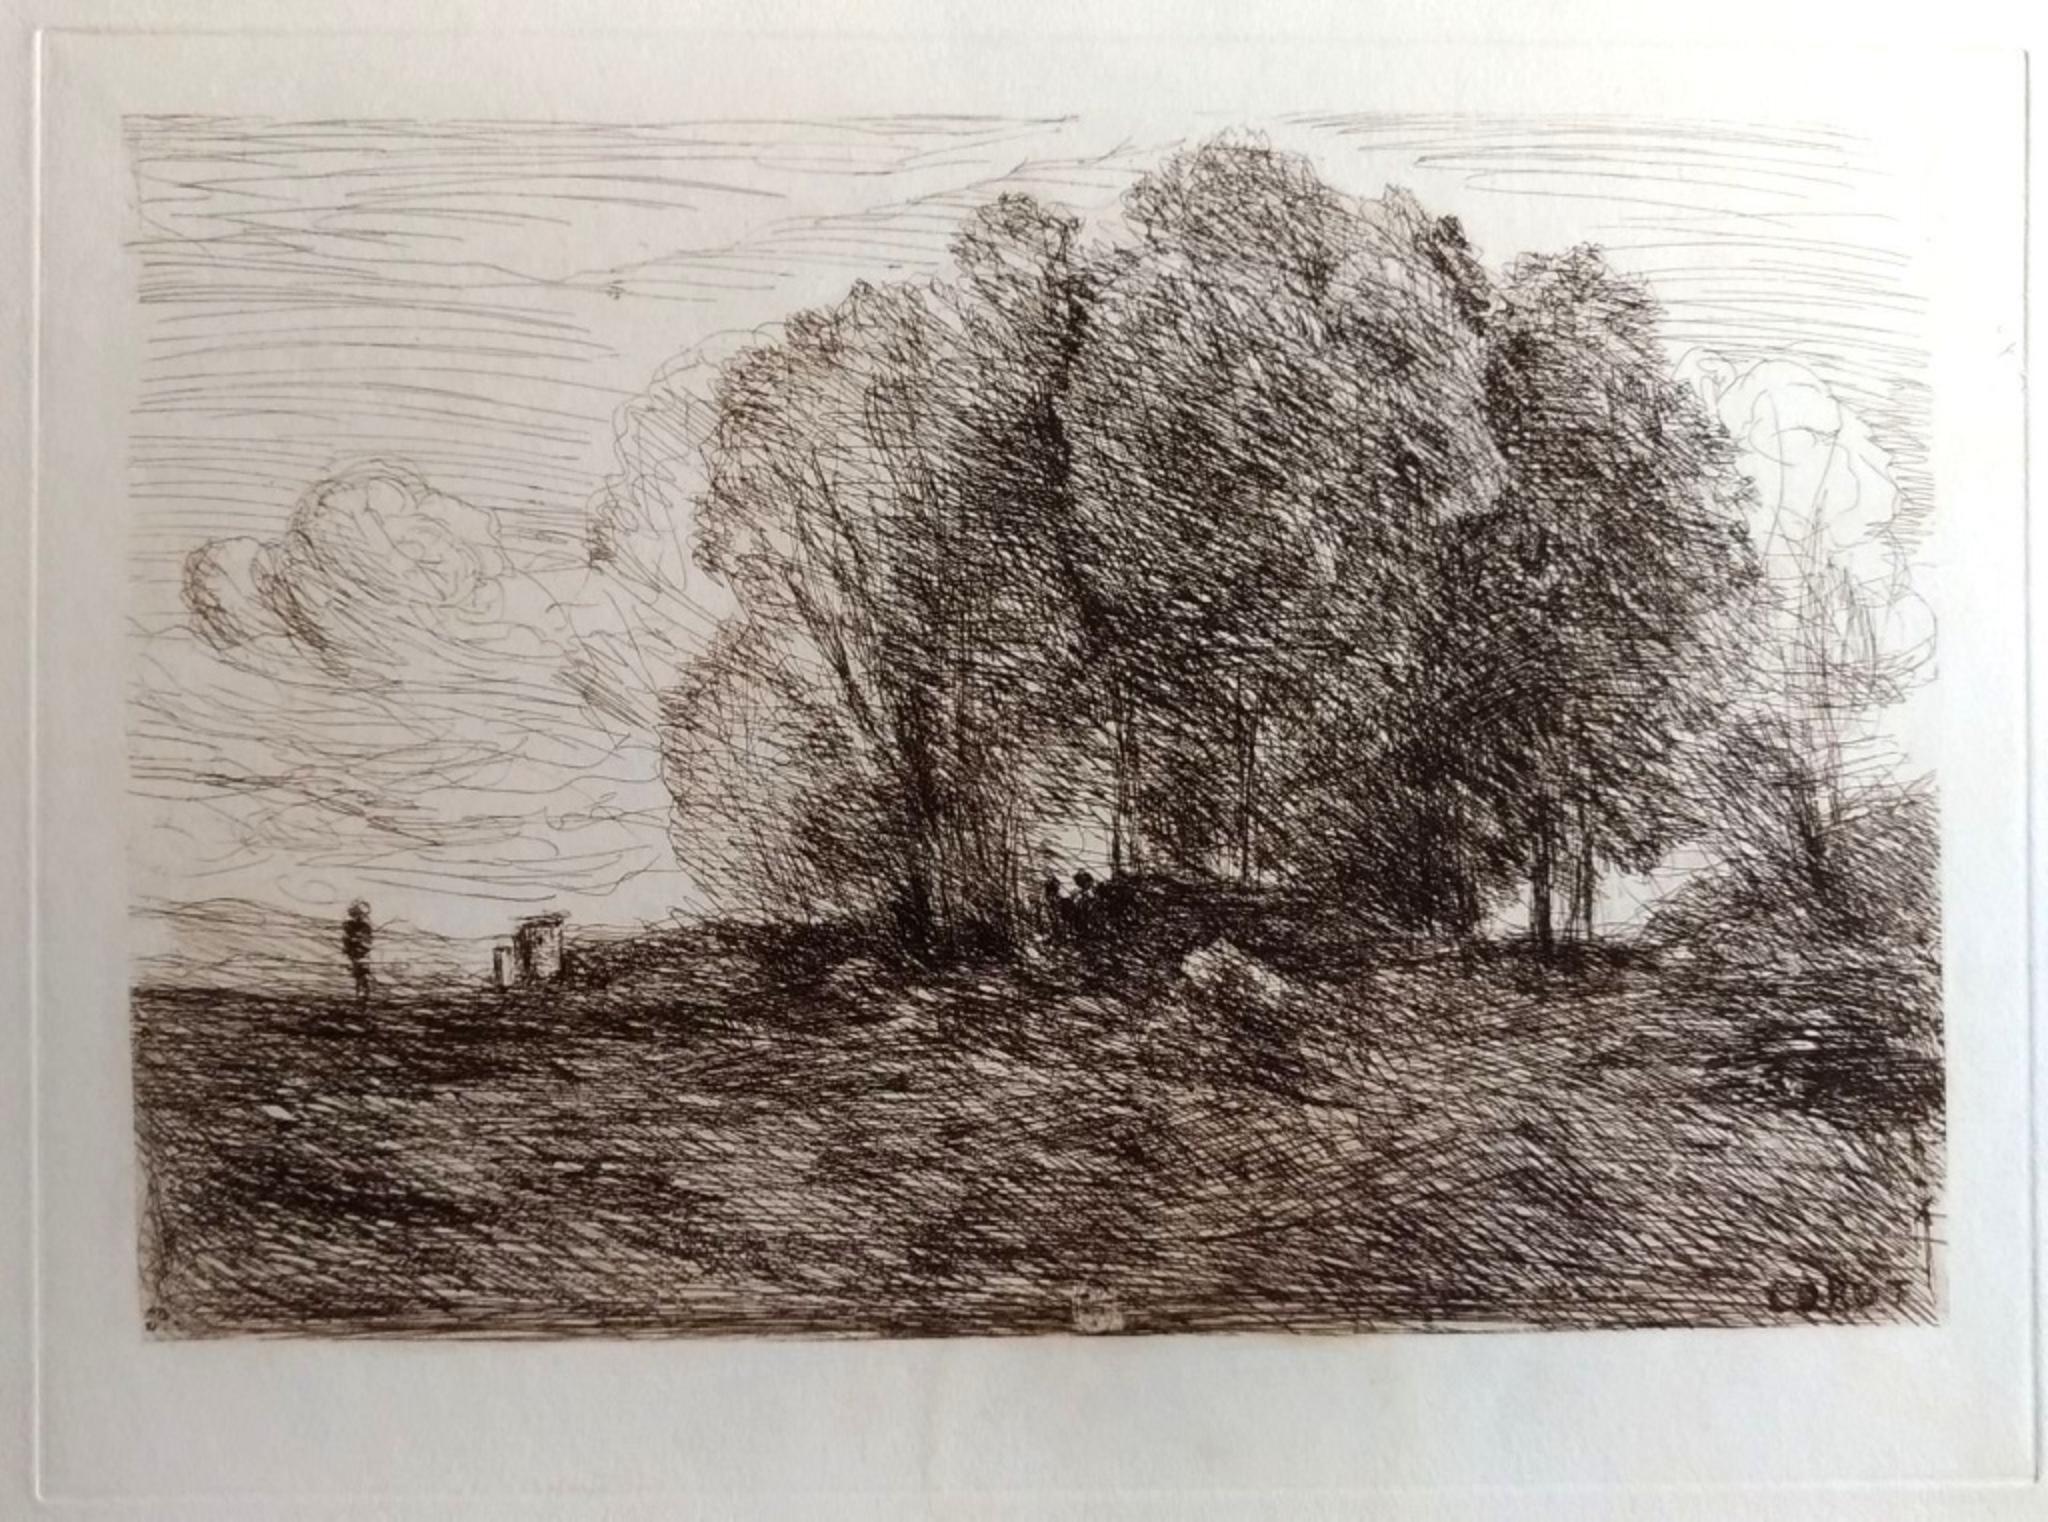 Jean-Baptiste-Camille Corot Figurative Print - Landscape #4 -  Etching by Camille Corot - 1850s